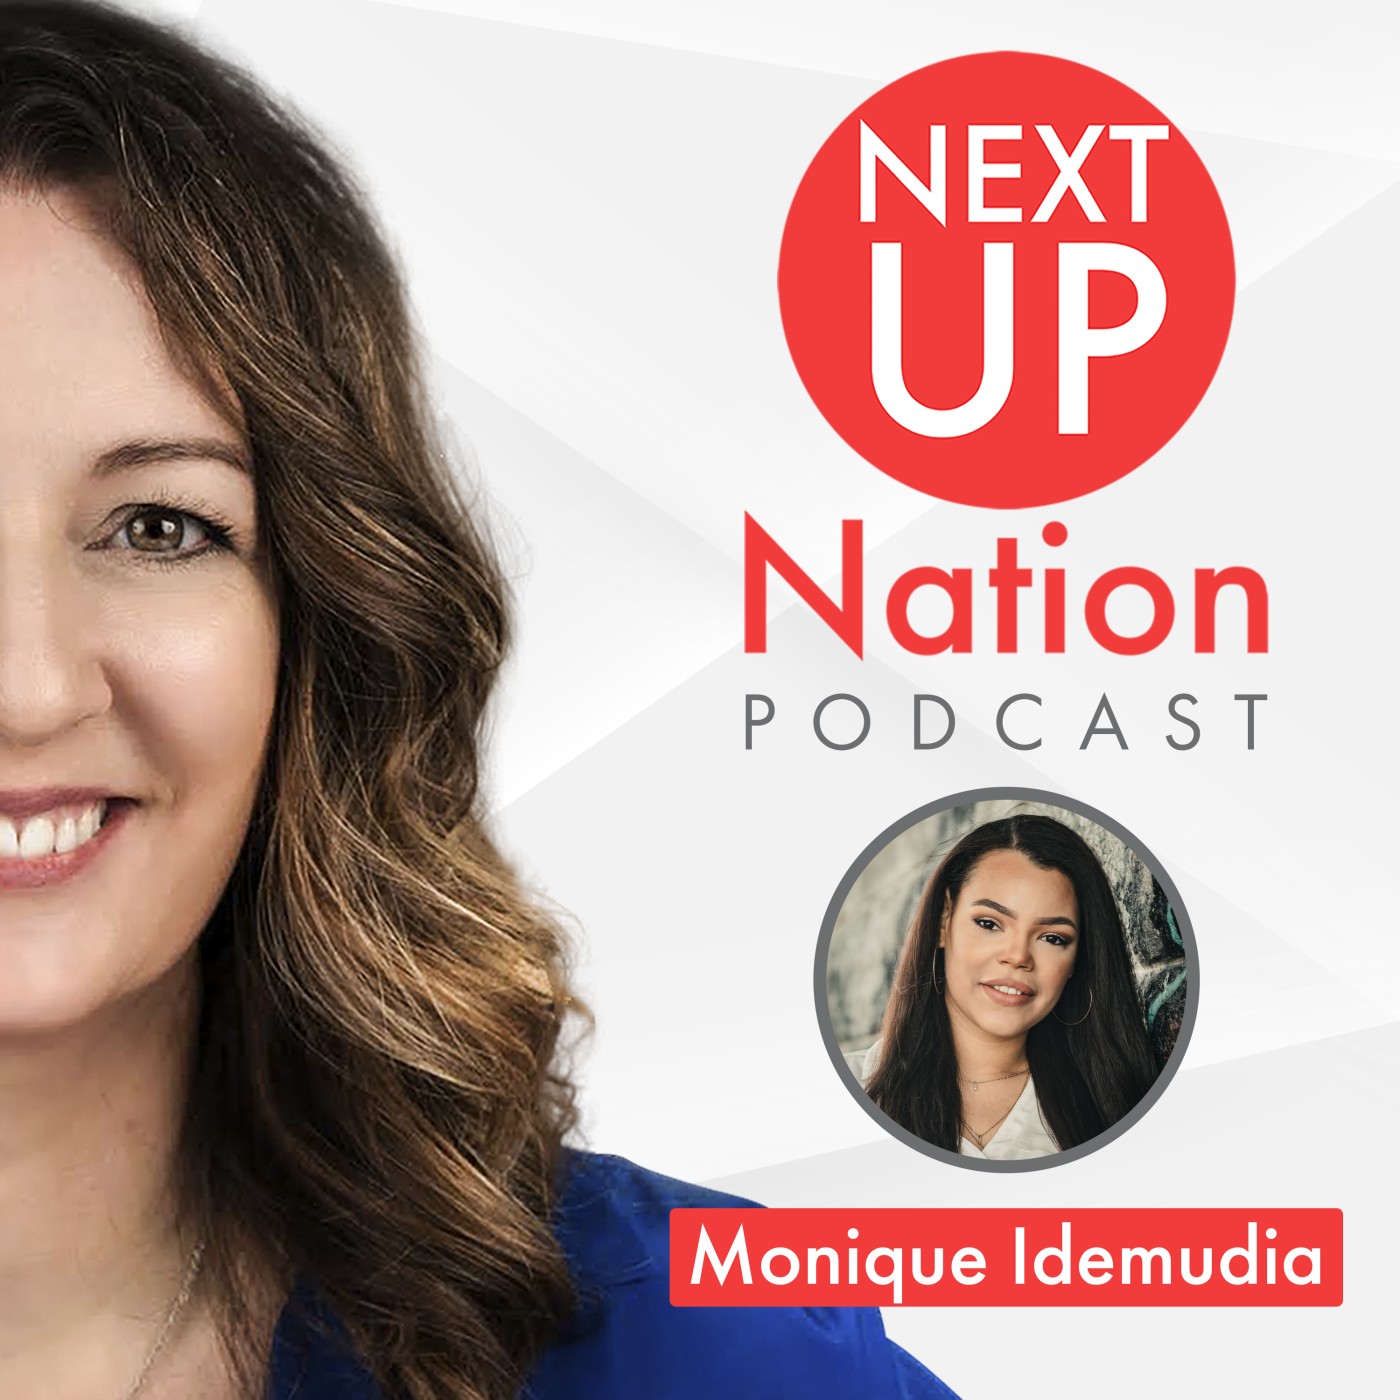 How to Build Your Brand the Right Way with Monique Idemudia